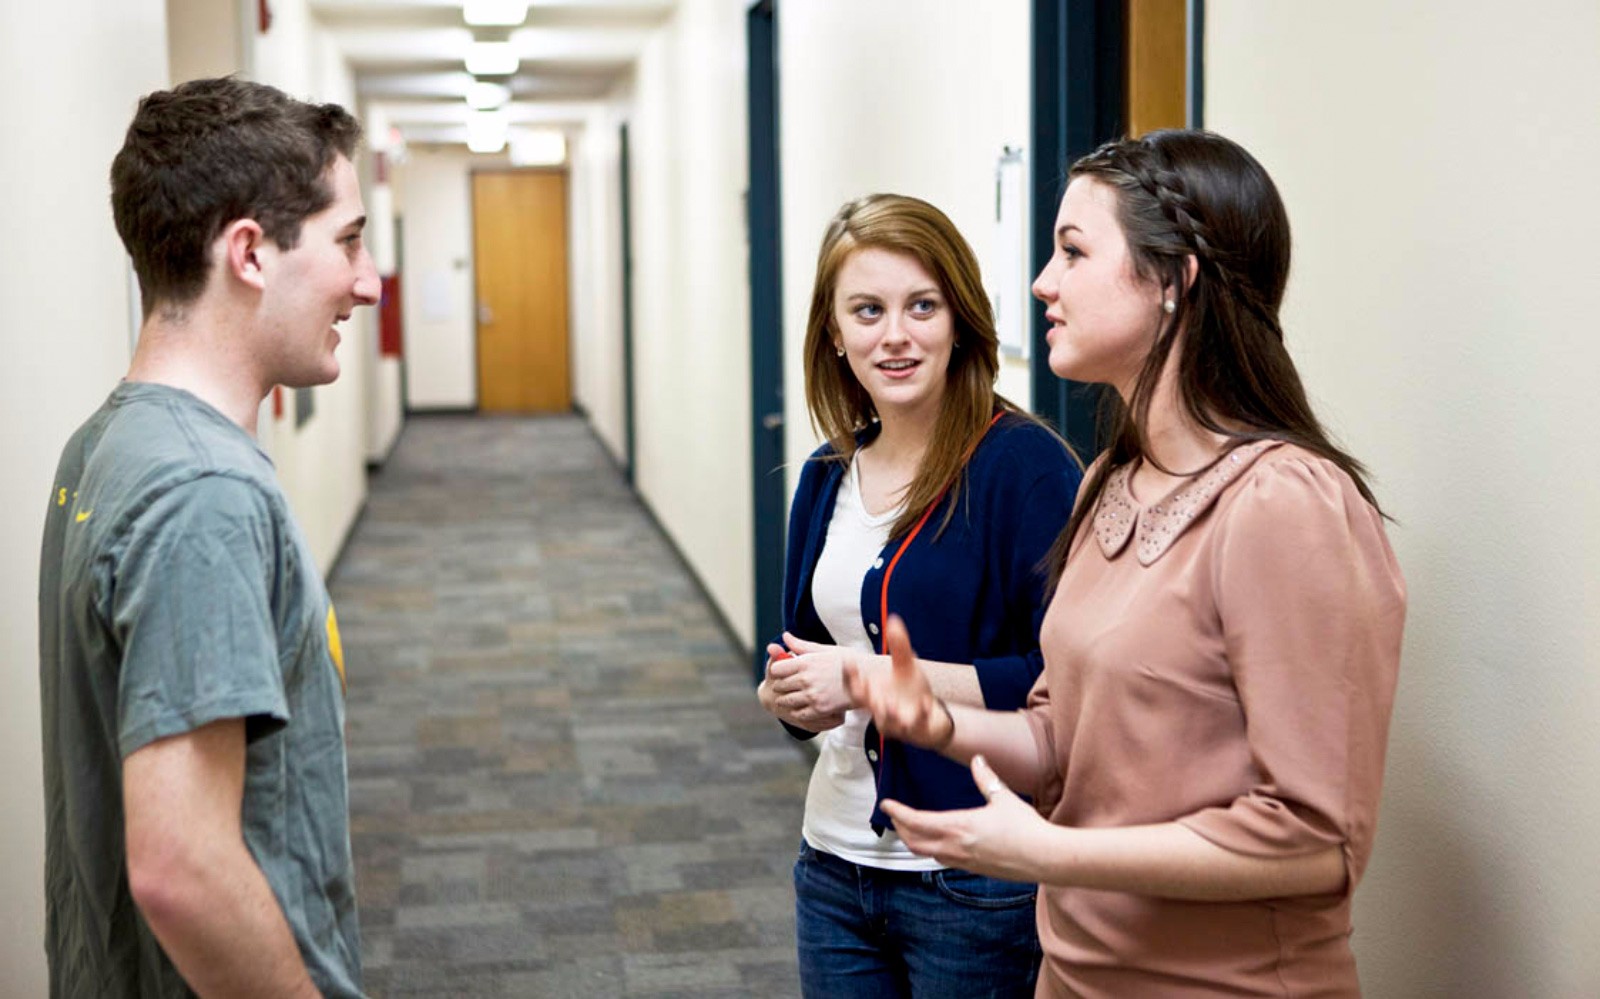 Three students standing and talking in a hallway dorm.